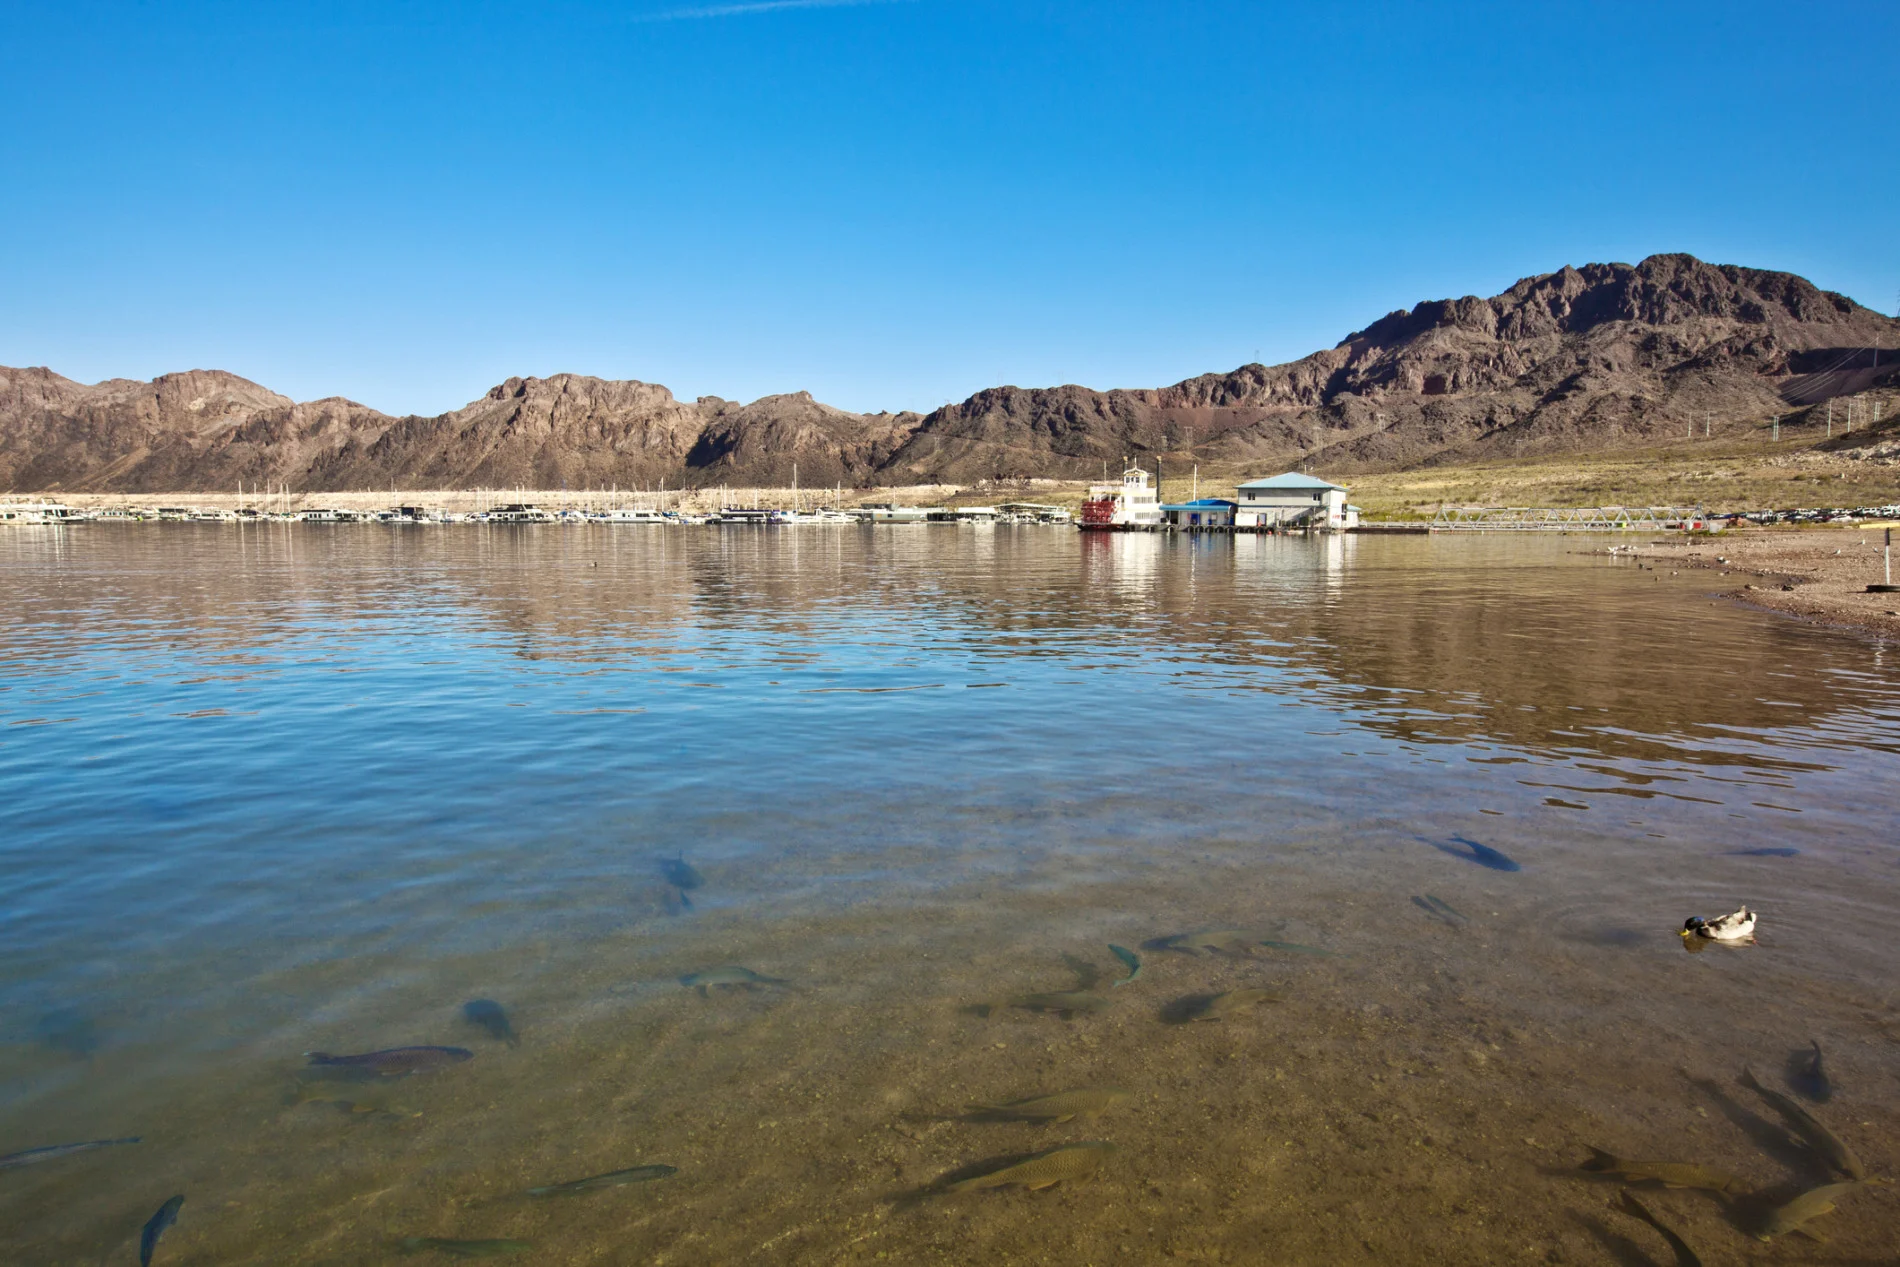 Lake Mead is typically around 372 metres above sea level when full. (Geri Lavrov/ Moment/ Getty Images)